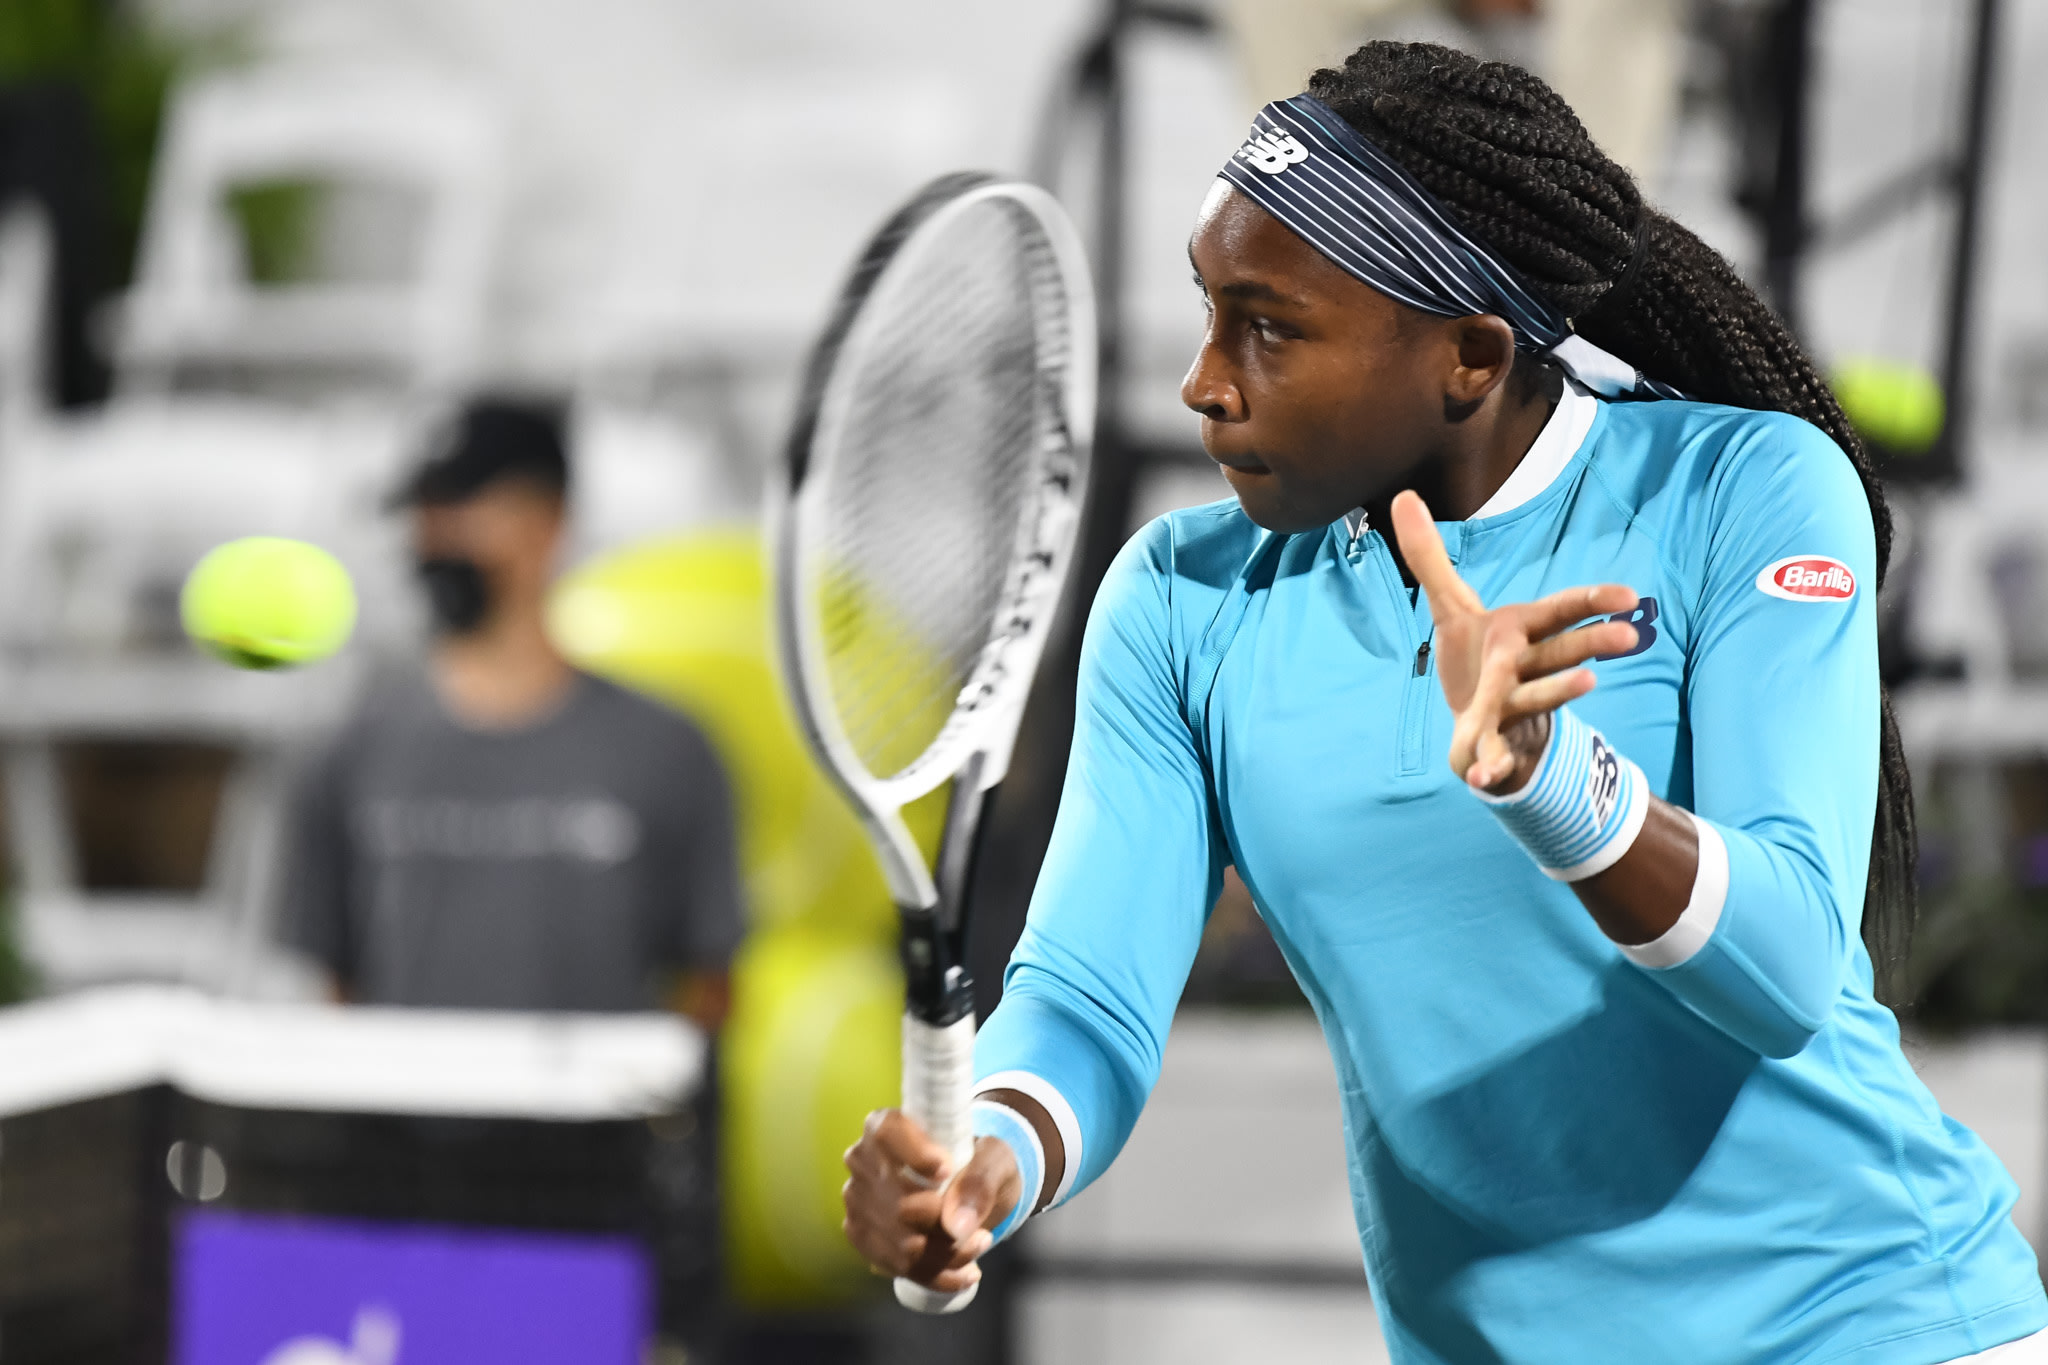 Coco Gauff makes winning tourlevel debut on green clay in Charleston